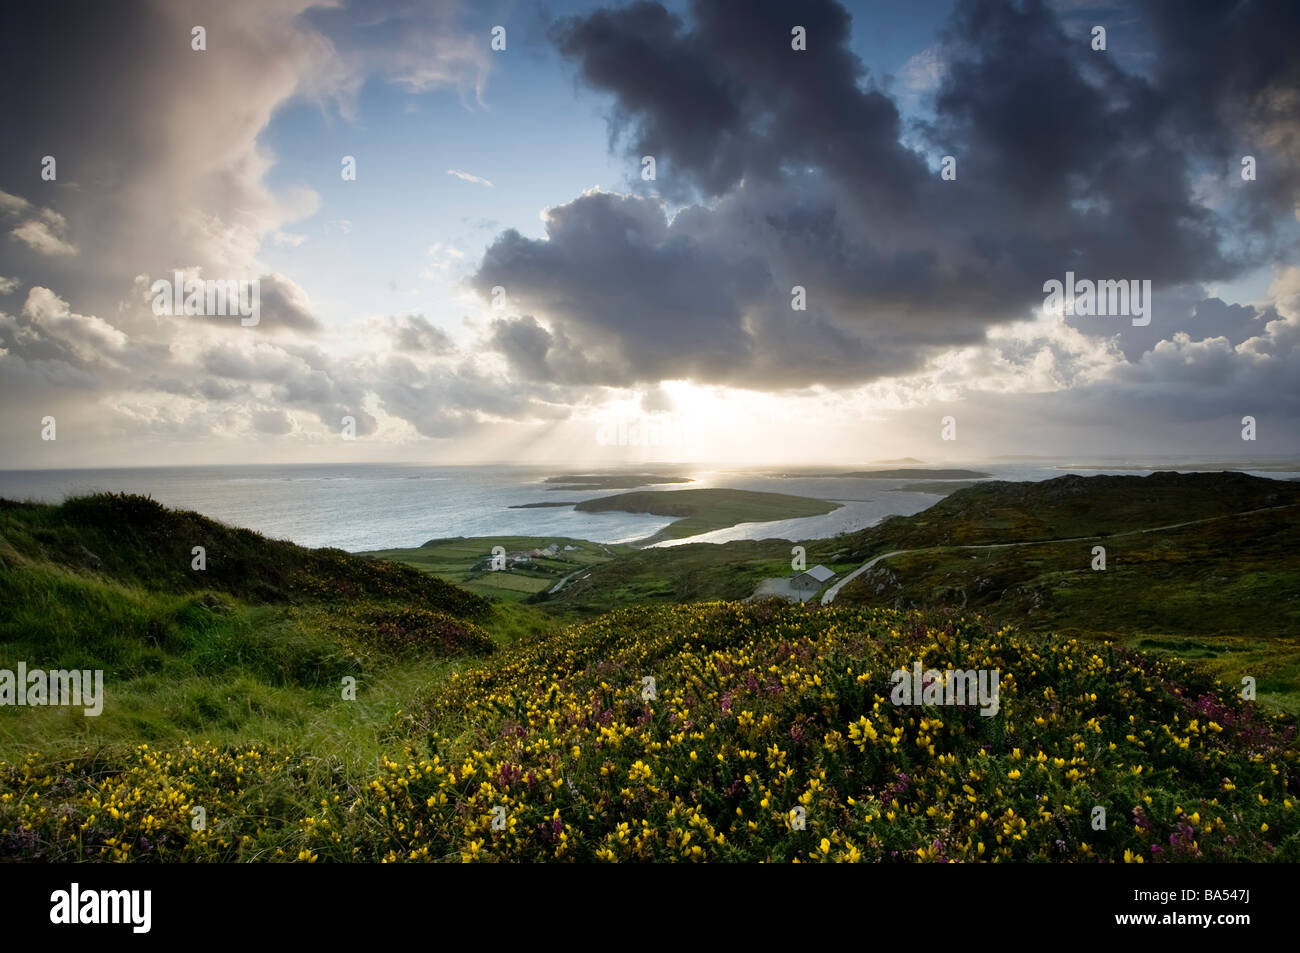 View from Sky Road near Clifden over looking the county Galway coast at sunset Stock Photo